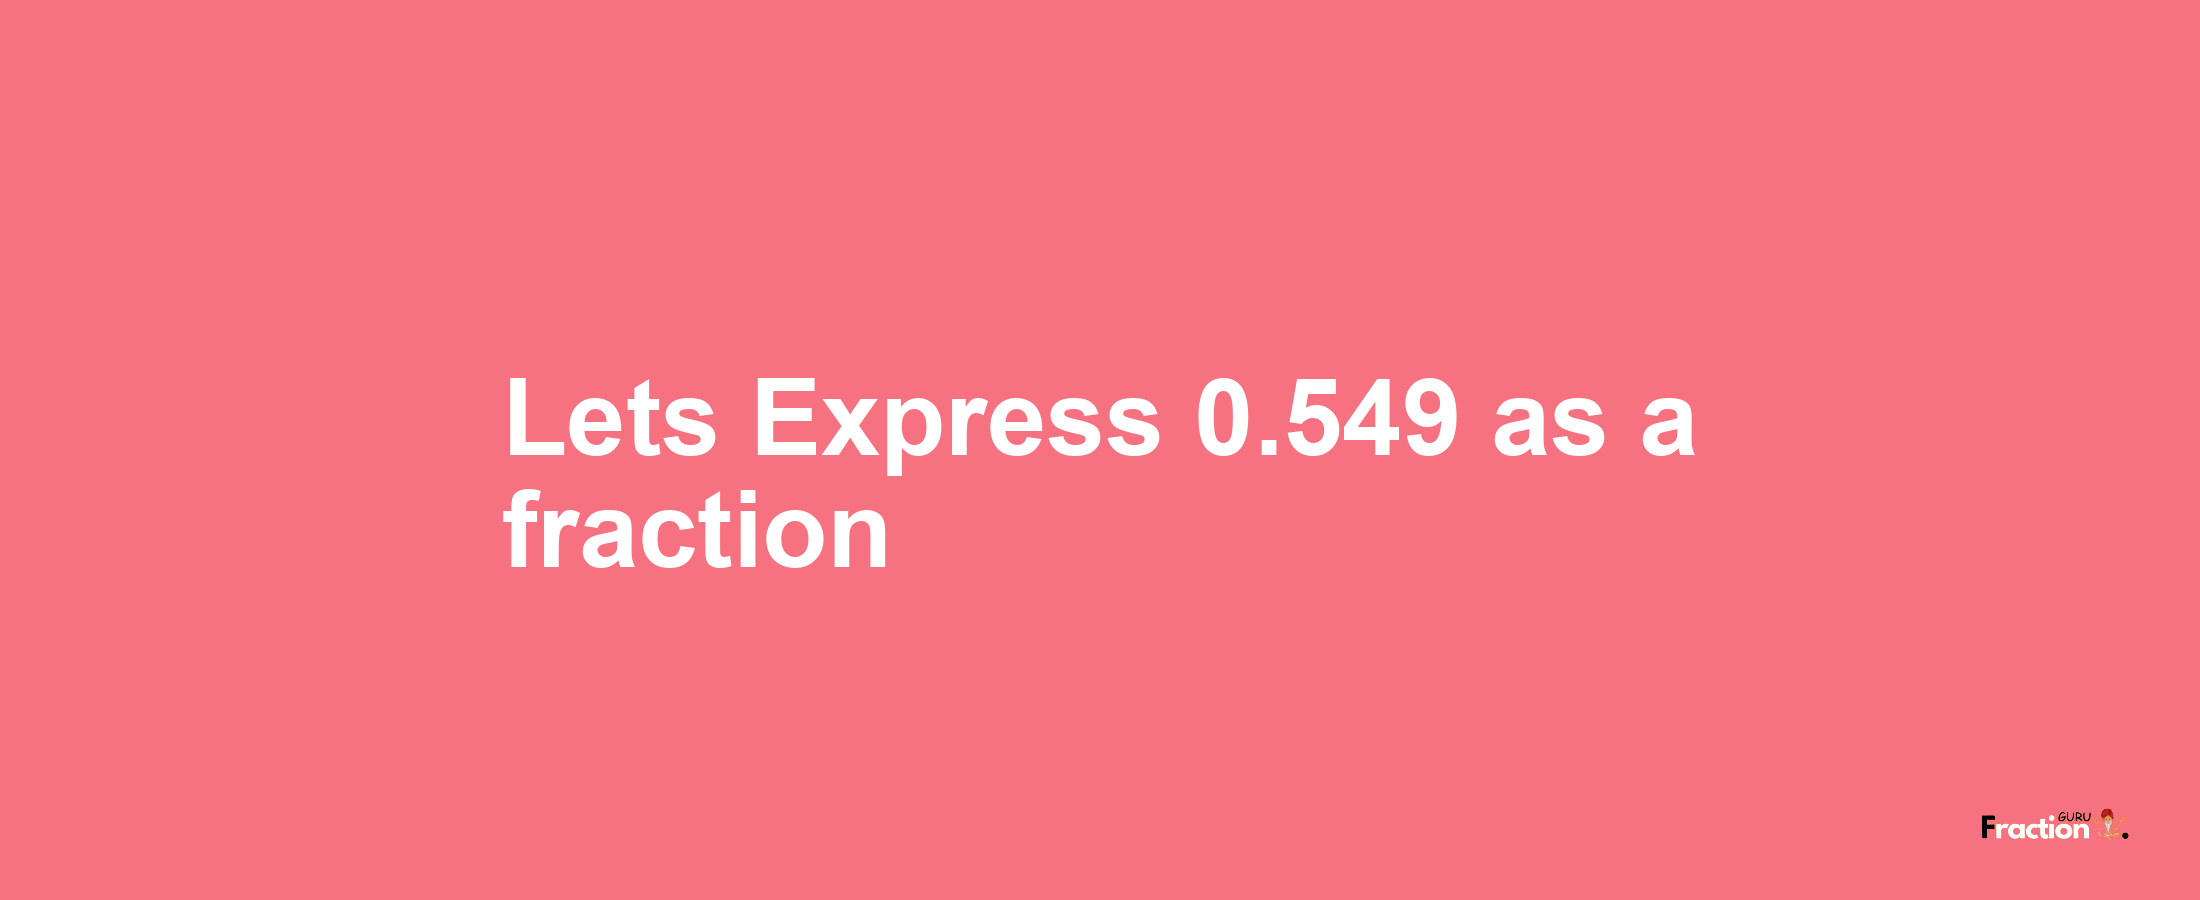 Lets Express 0.549 as afraction